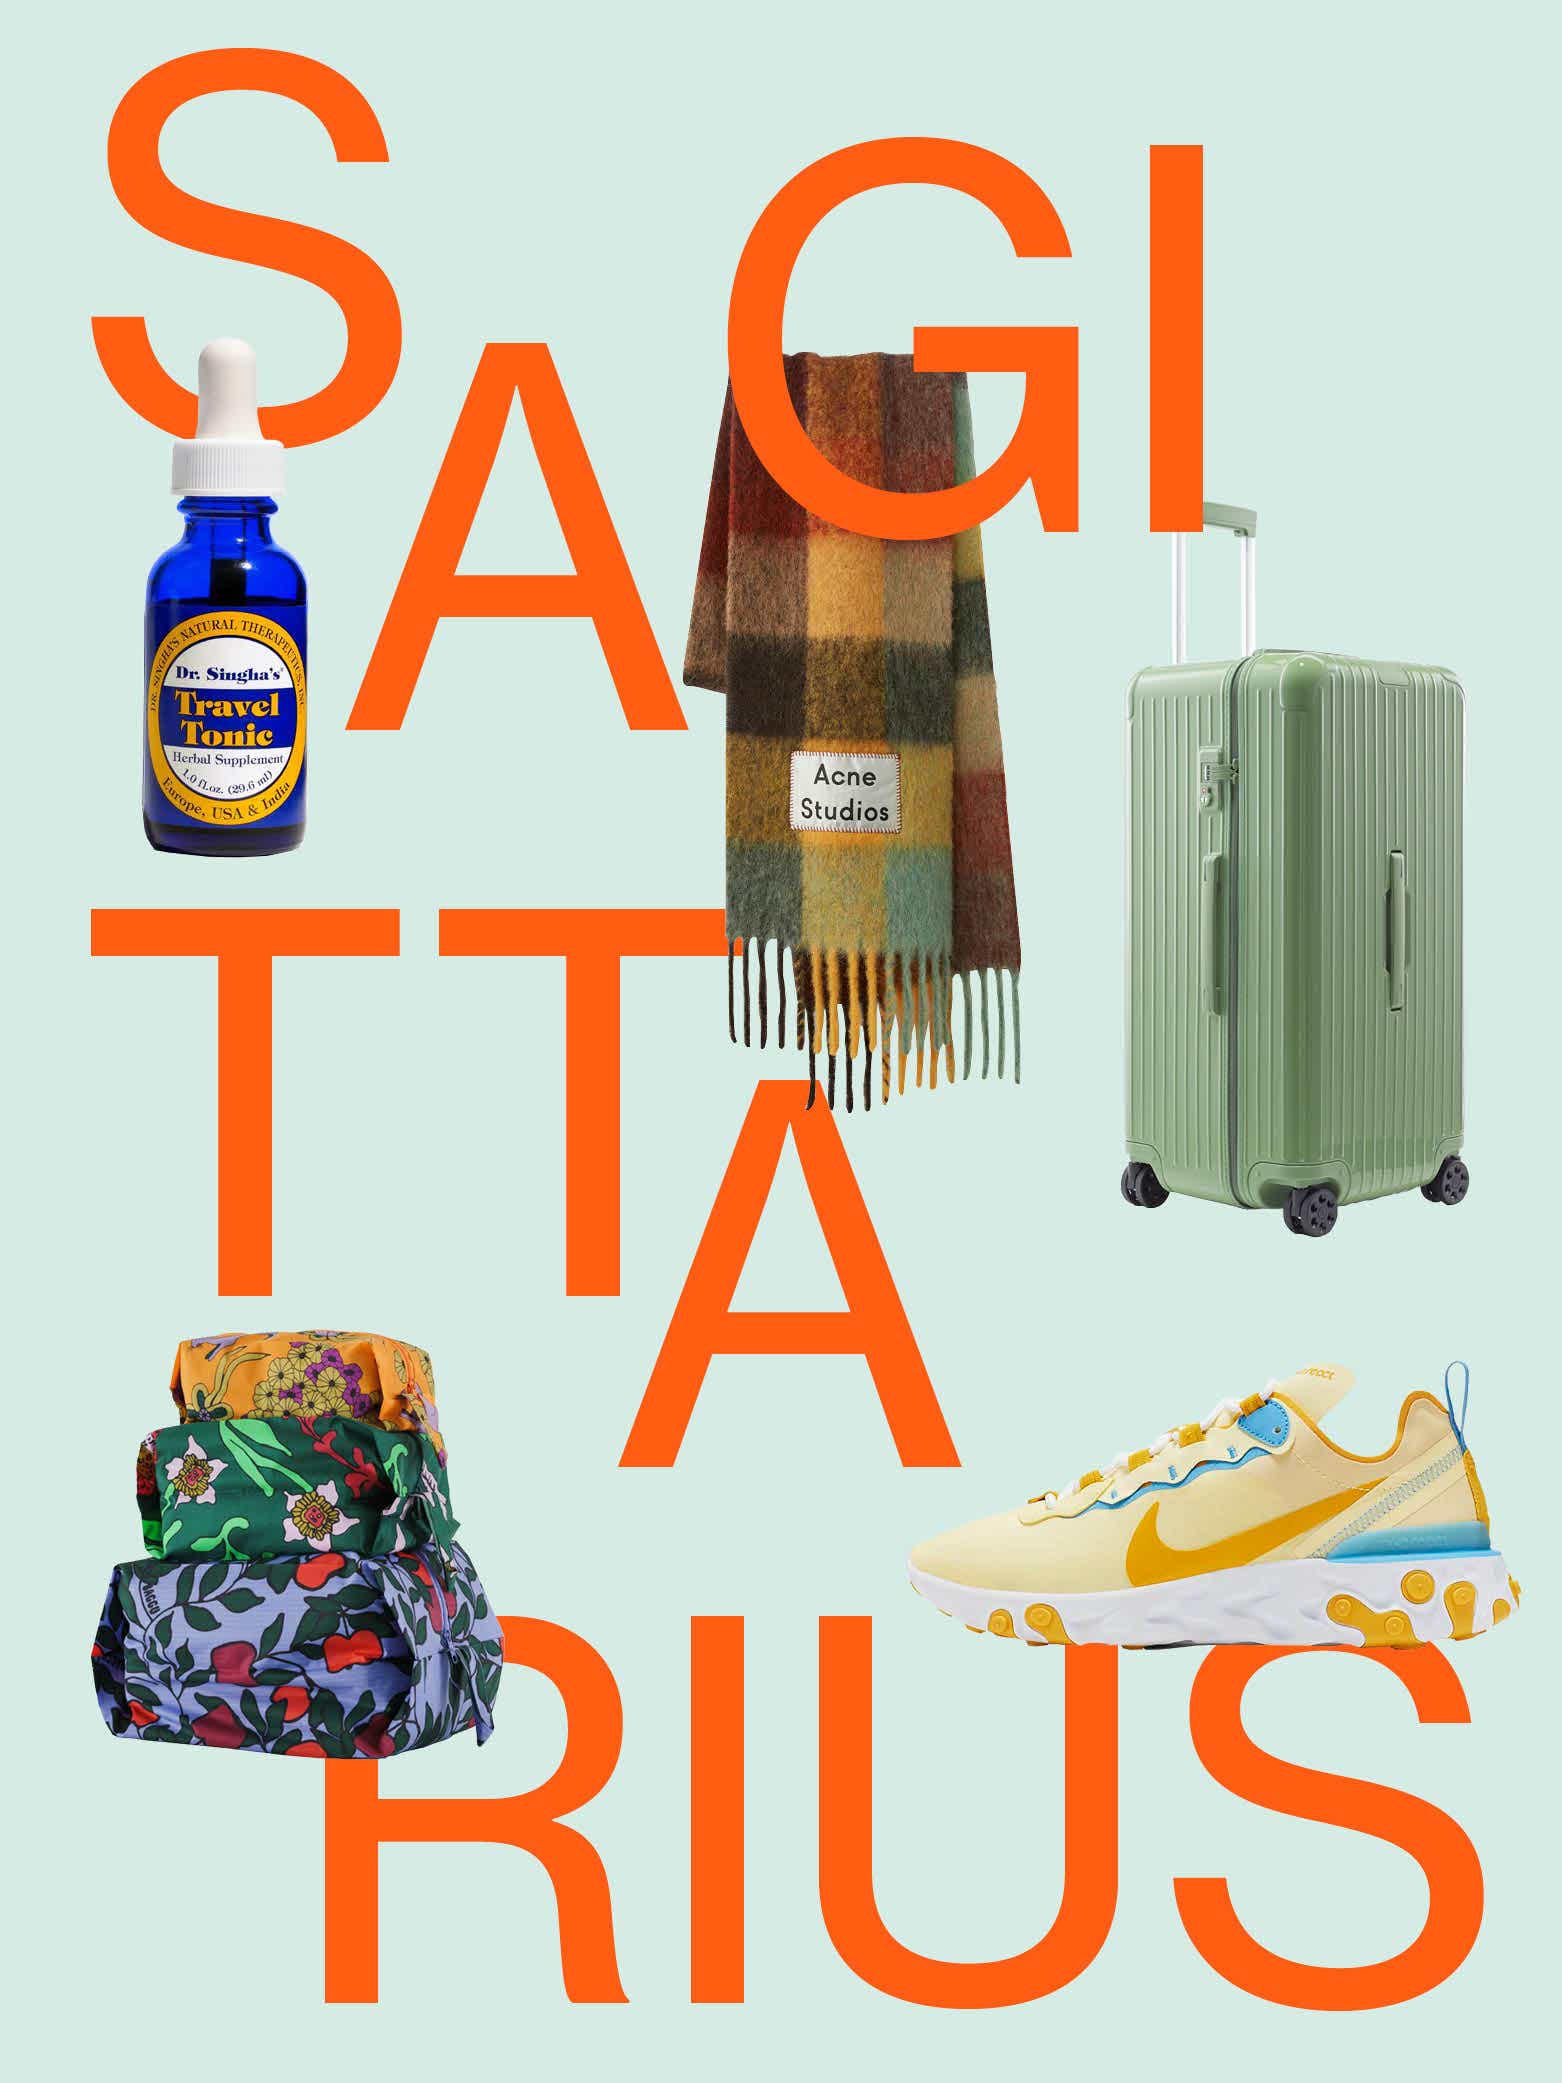 We Packed Your Suitcase for the Holidays